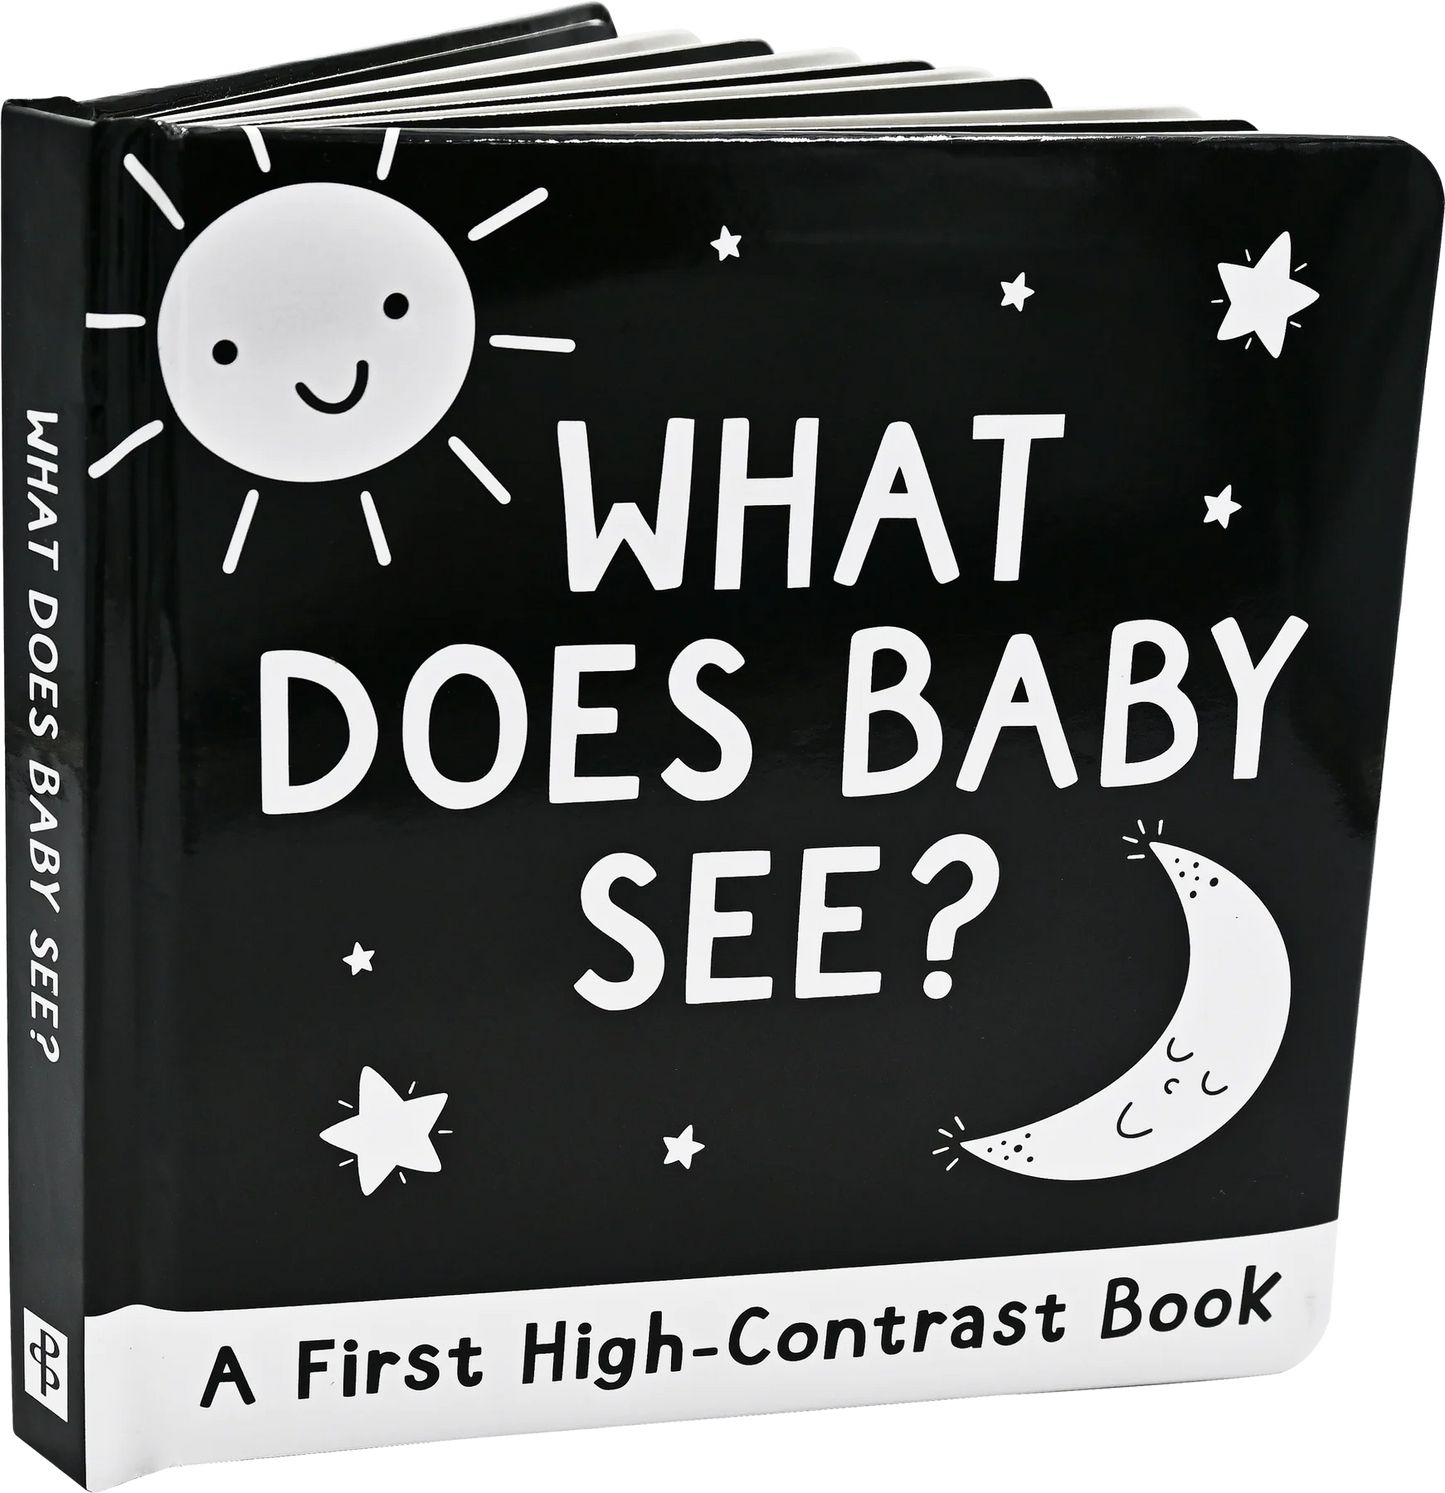 What Does Baby See? Contrast Book